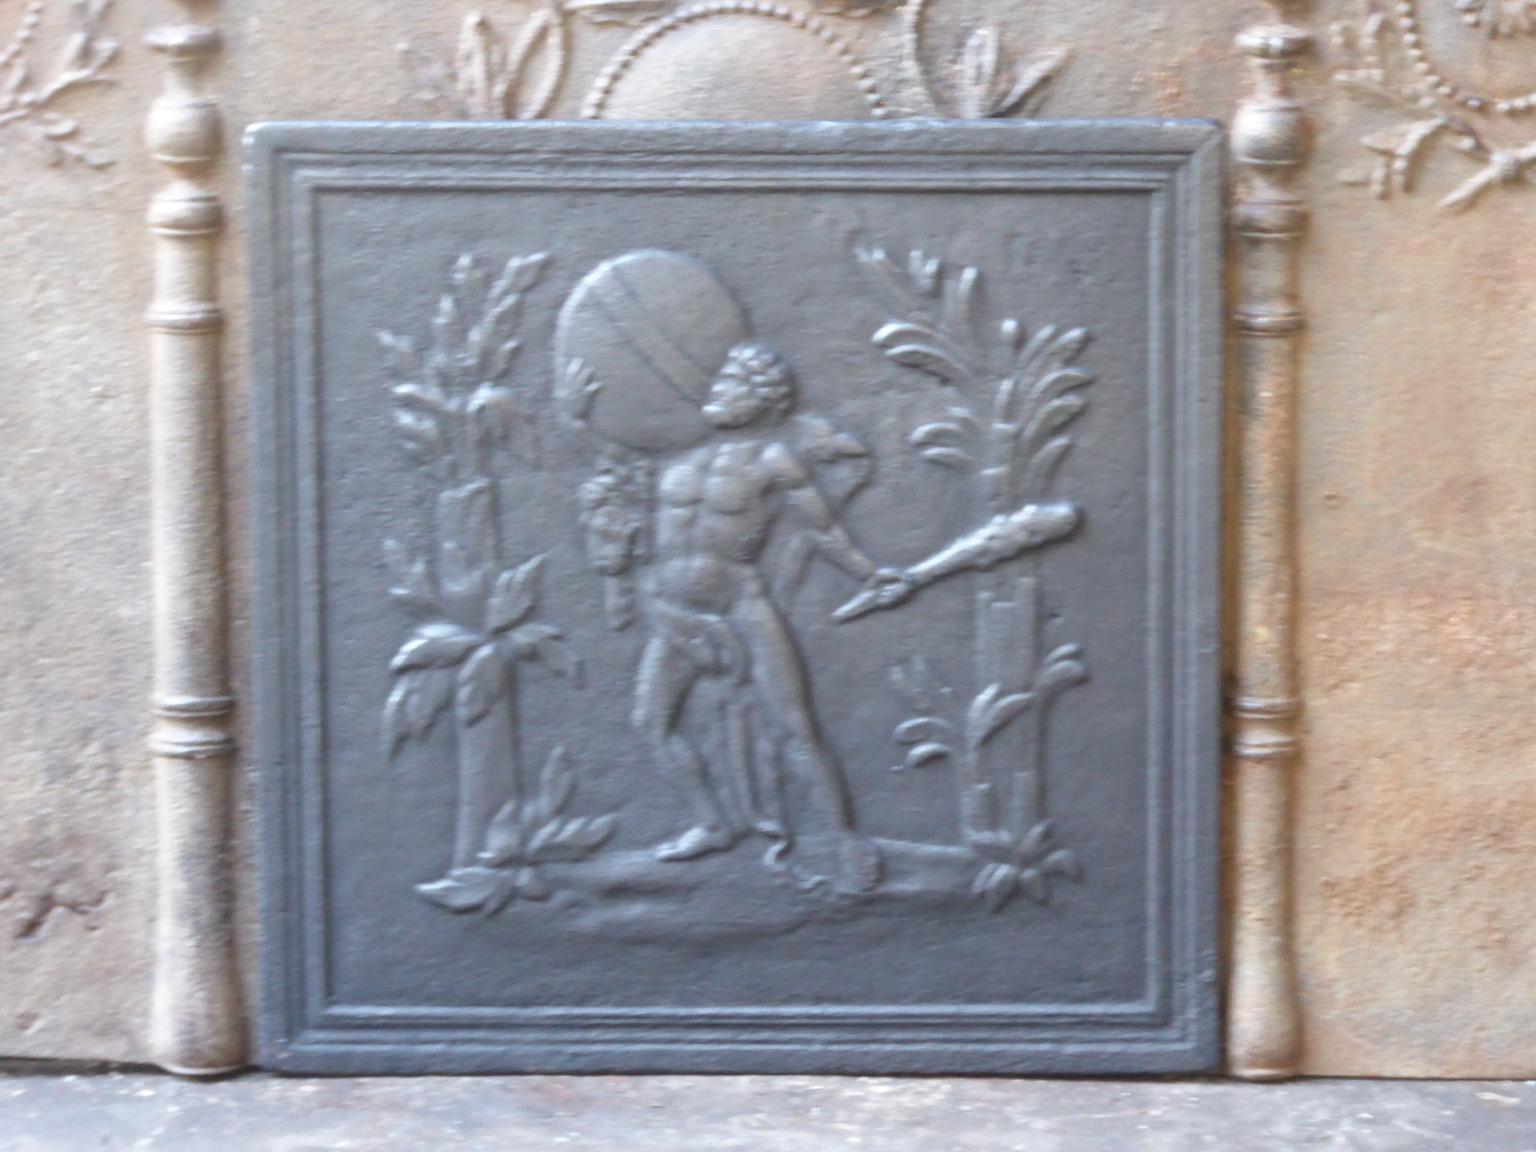 18th-19th century French neoclassical fireback. Hercules has Heaven in his arms, in exchange for the golden apples that atlas promises to deliver.

The fireback is made of cast iron and has a black / pewter patina. The fireback is in a good